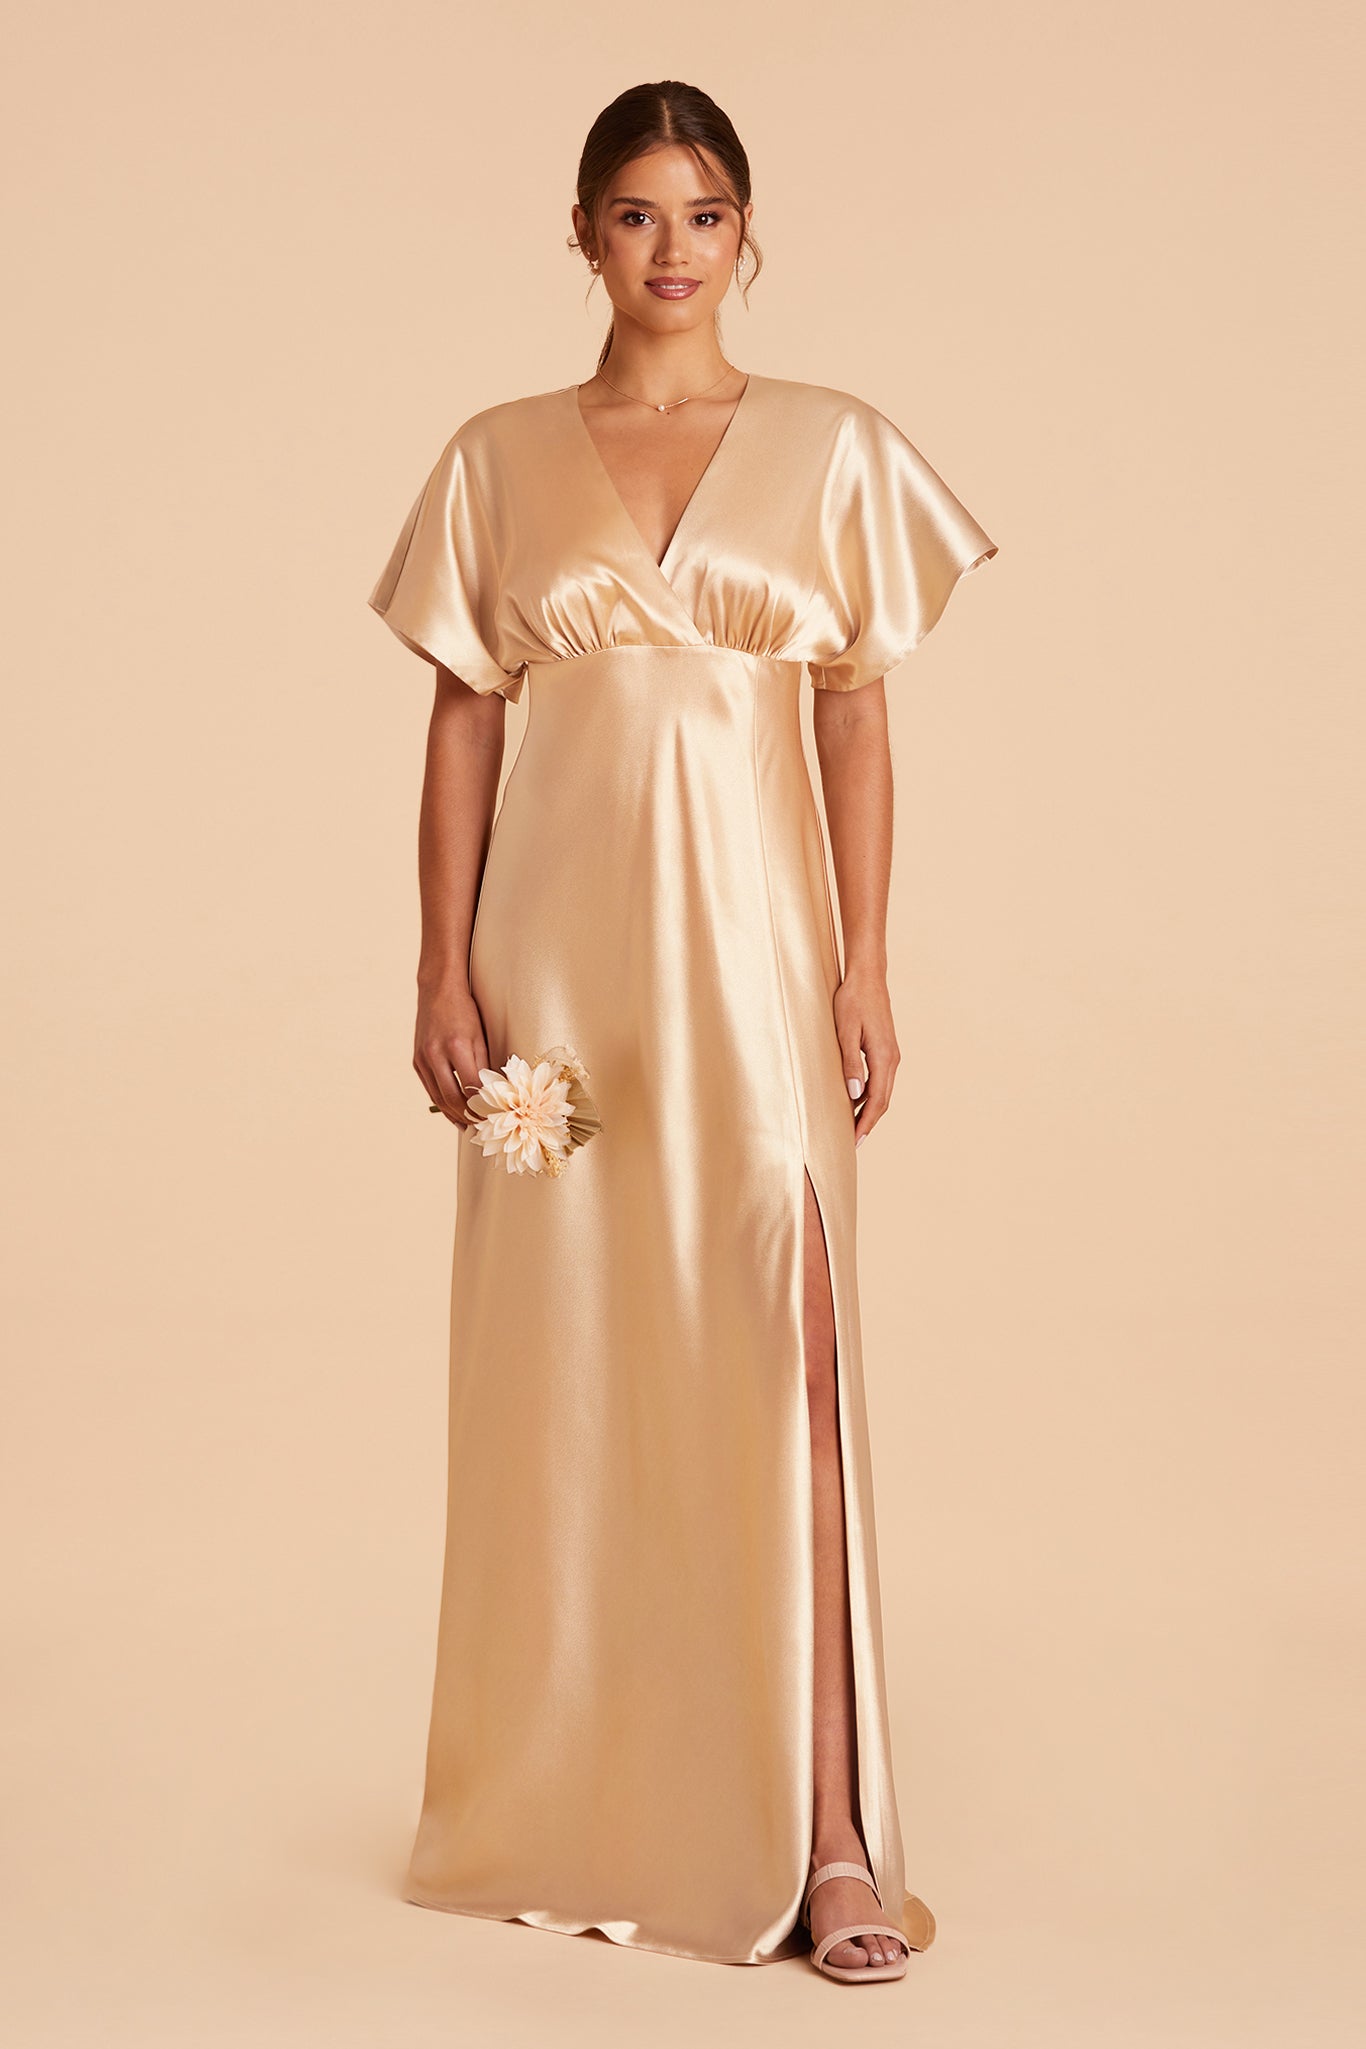 Jesse Satin Dress in gold satin by Birdy Grey, front view